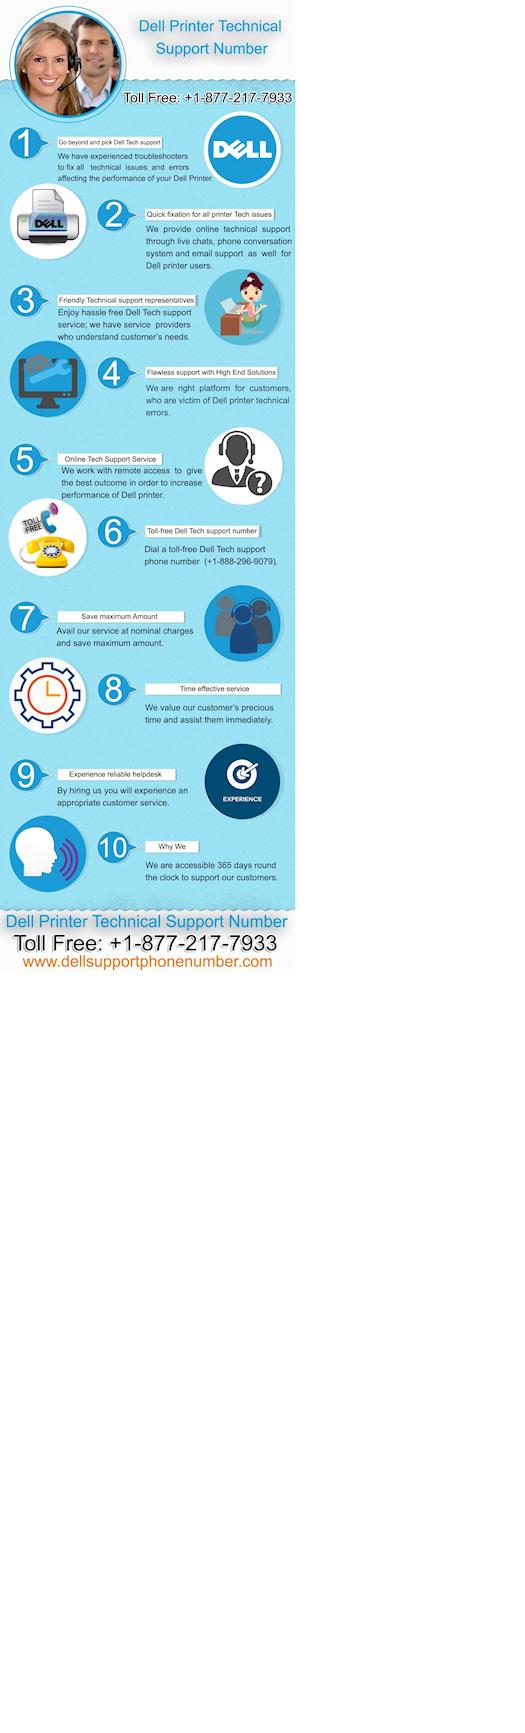 1-877-217-7933 Dell Printer Tech Support Number